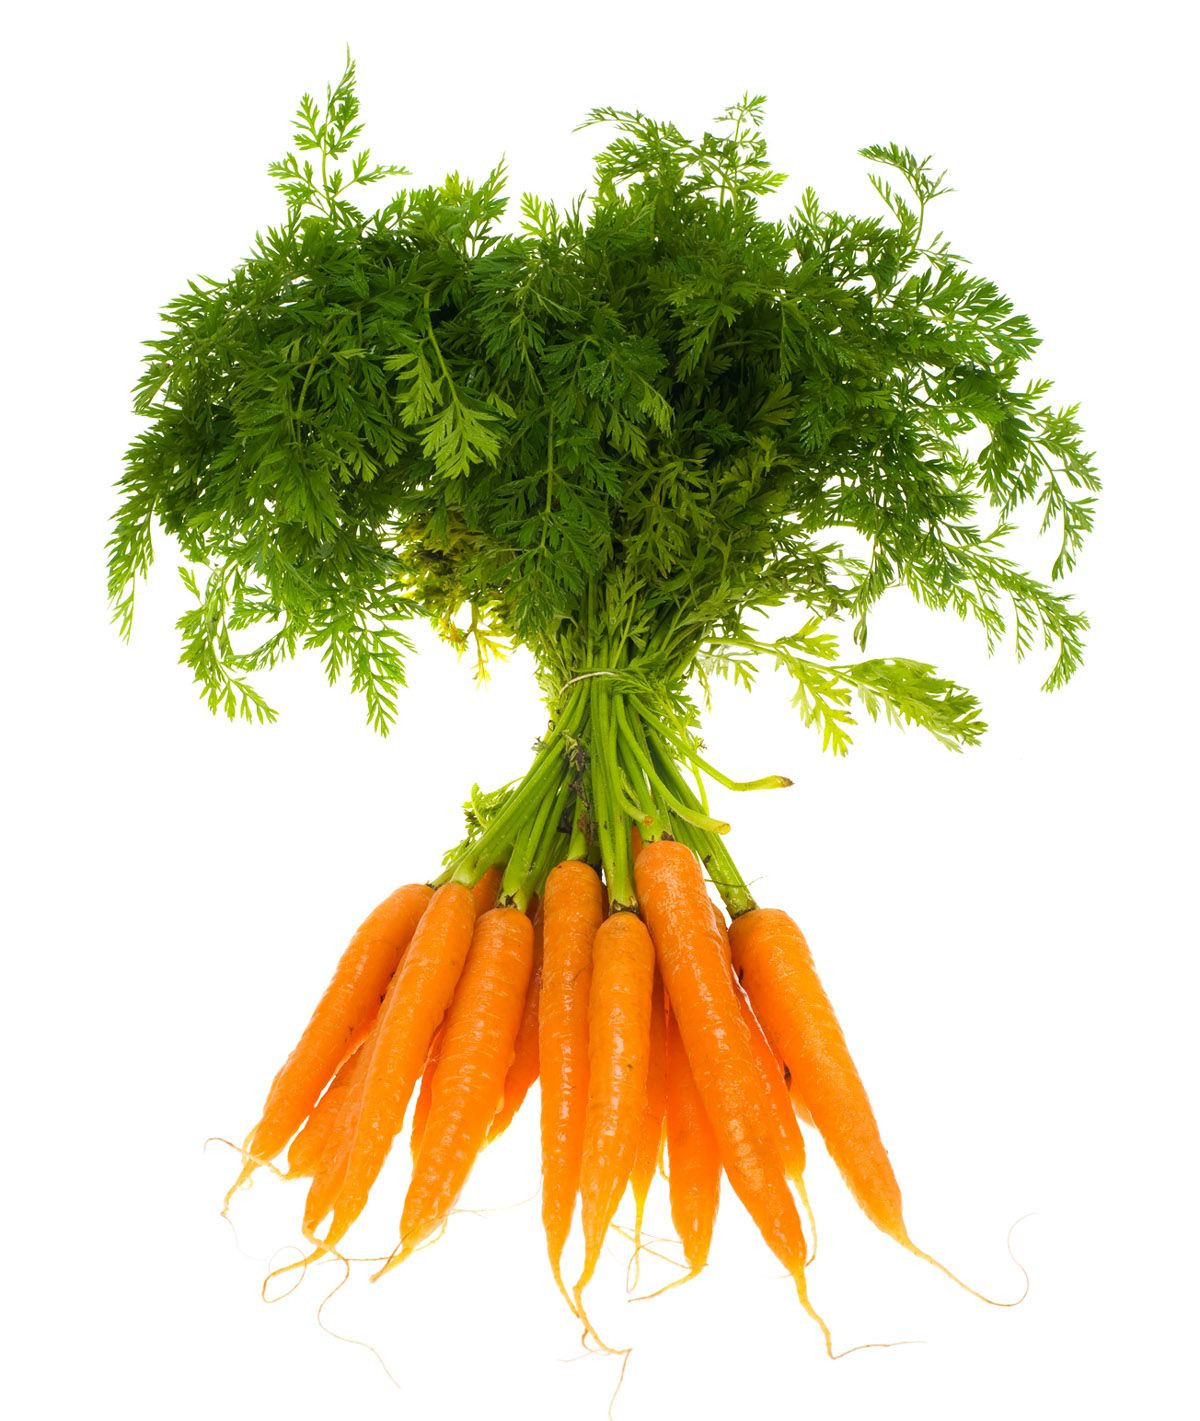 Carrot Fruit Or Vegetable
 Carrot picture material Fruits and ve ables